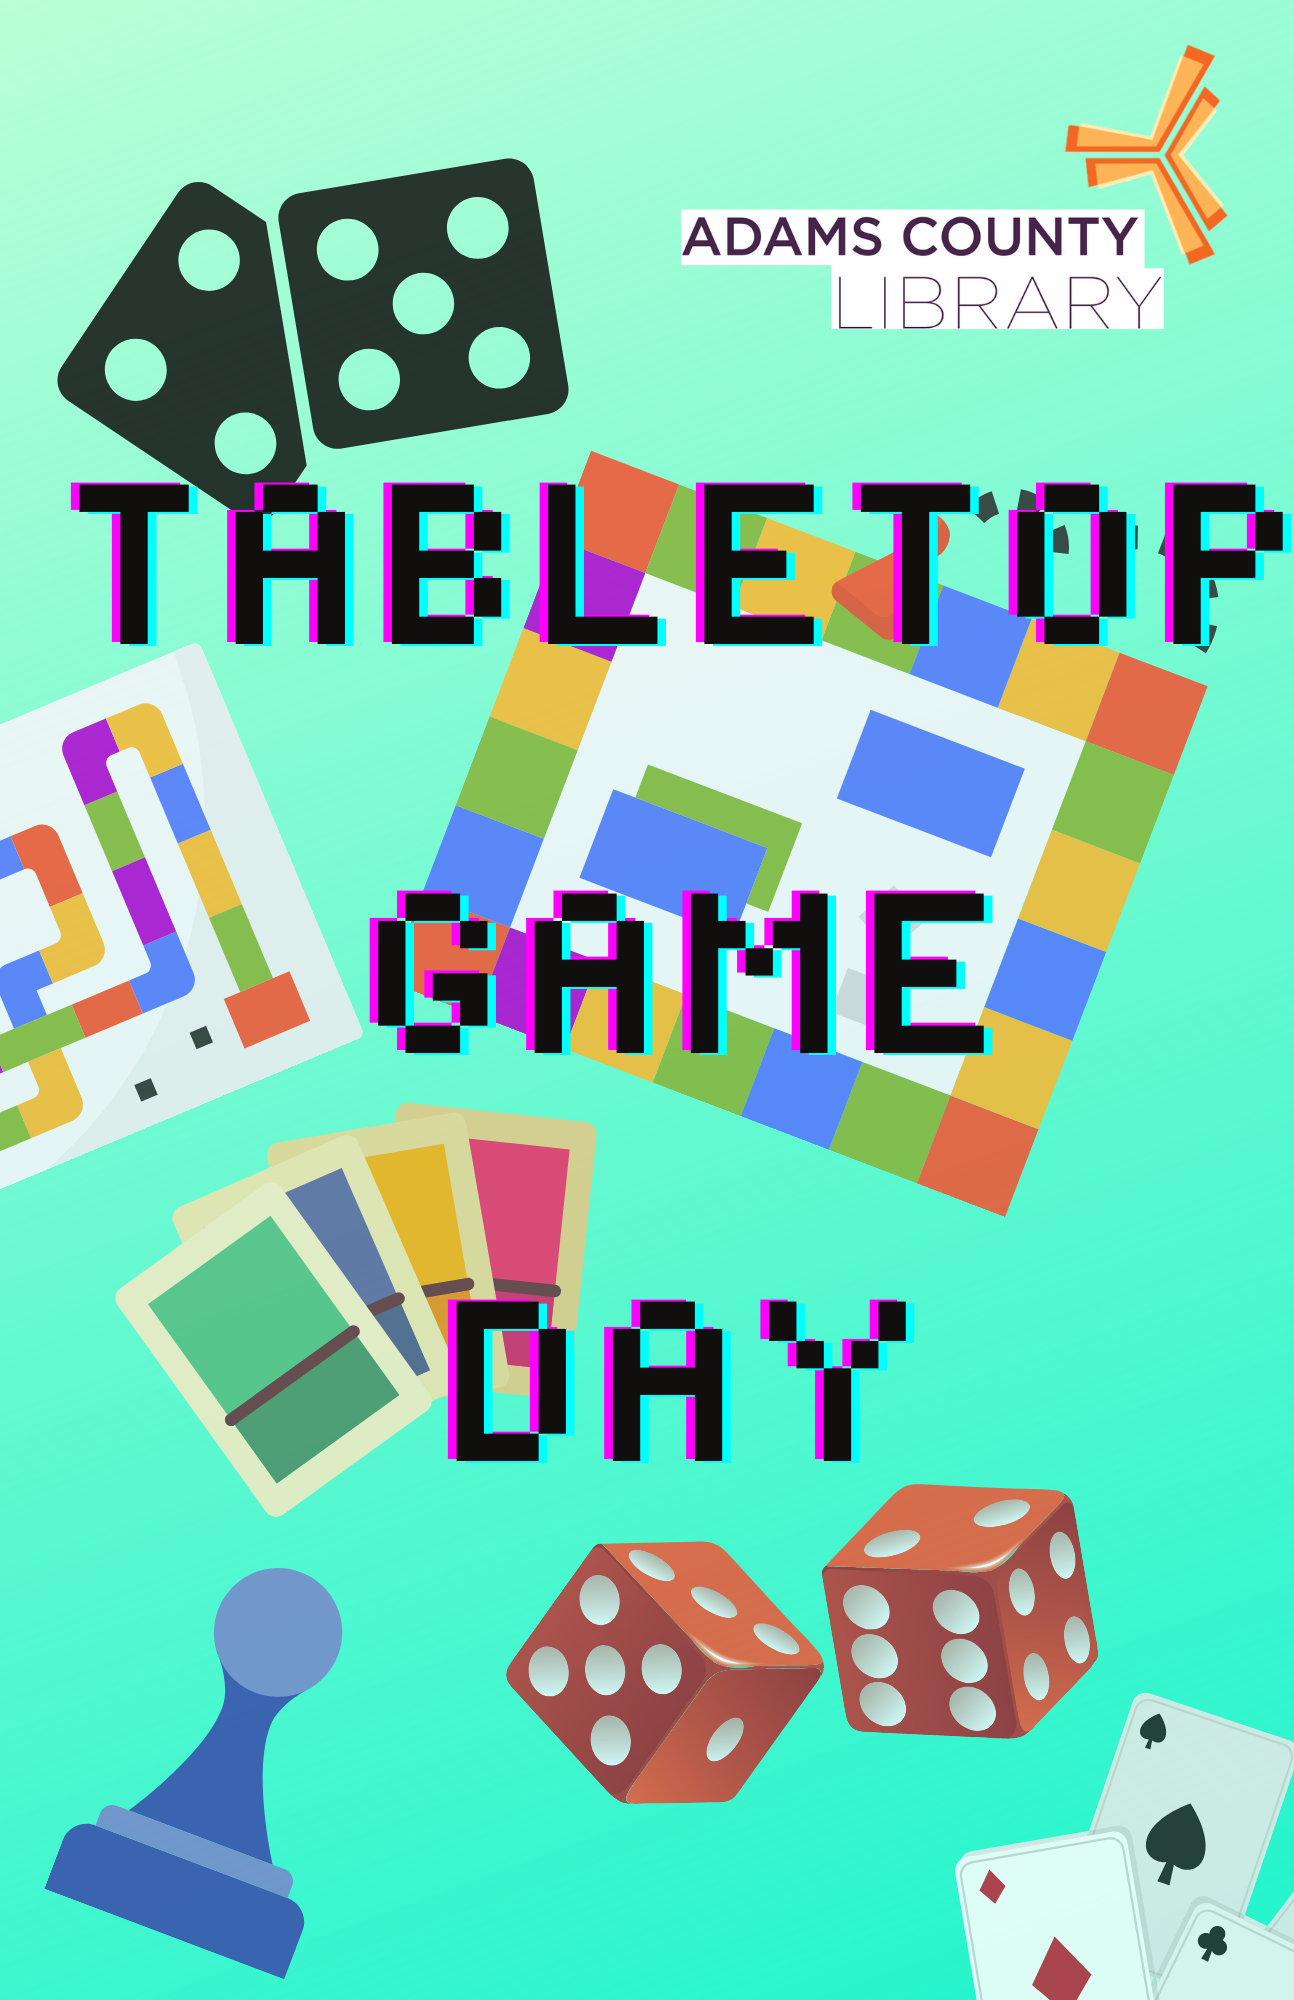 TABLETOP GAME DAY